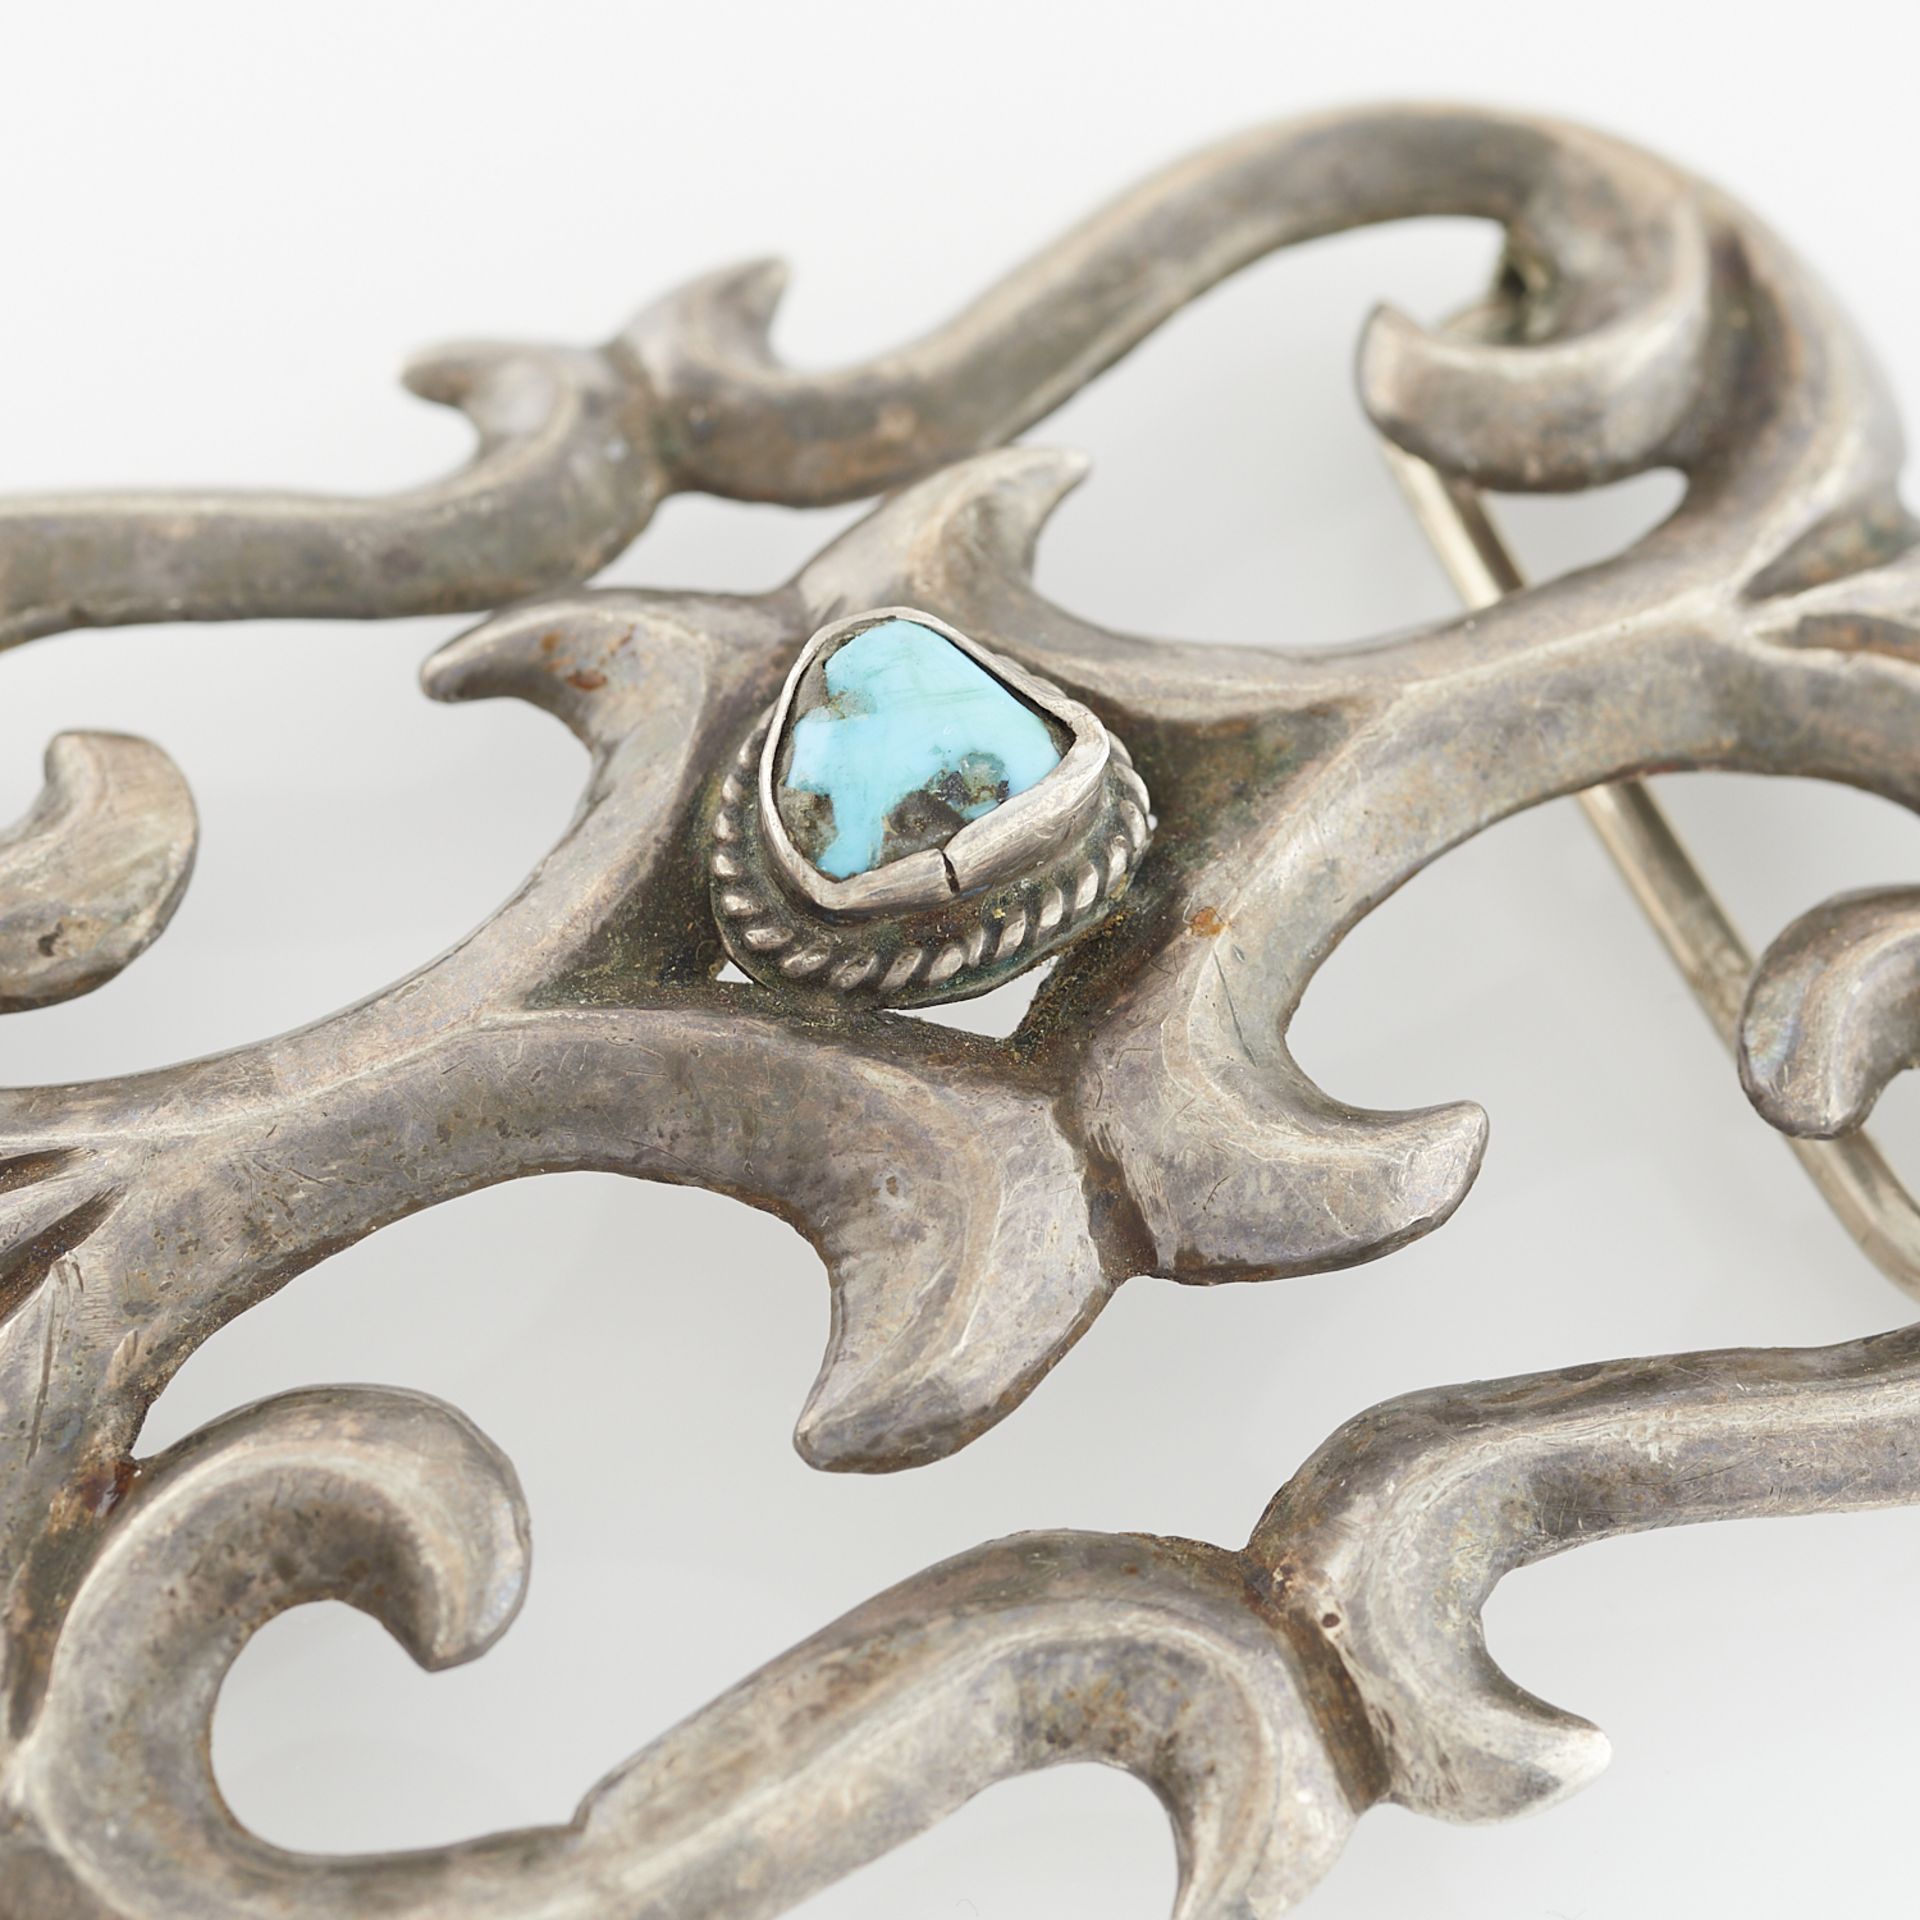 Sandcast Buckle with Turquoise - Image 5 of 5